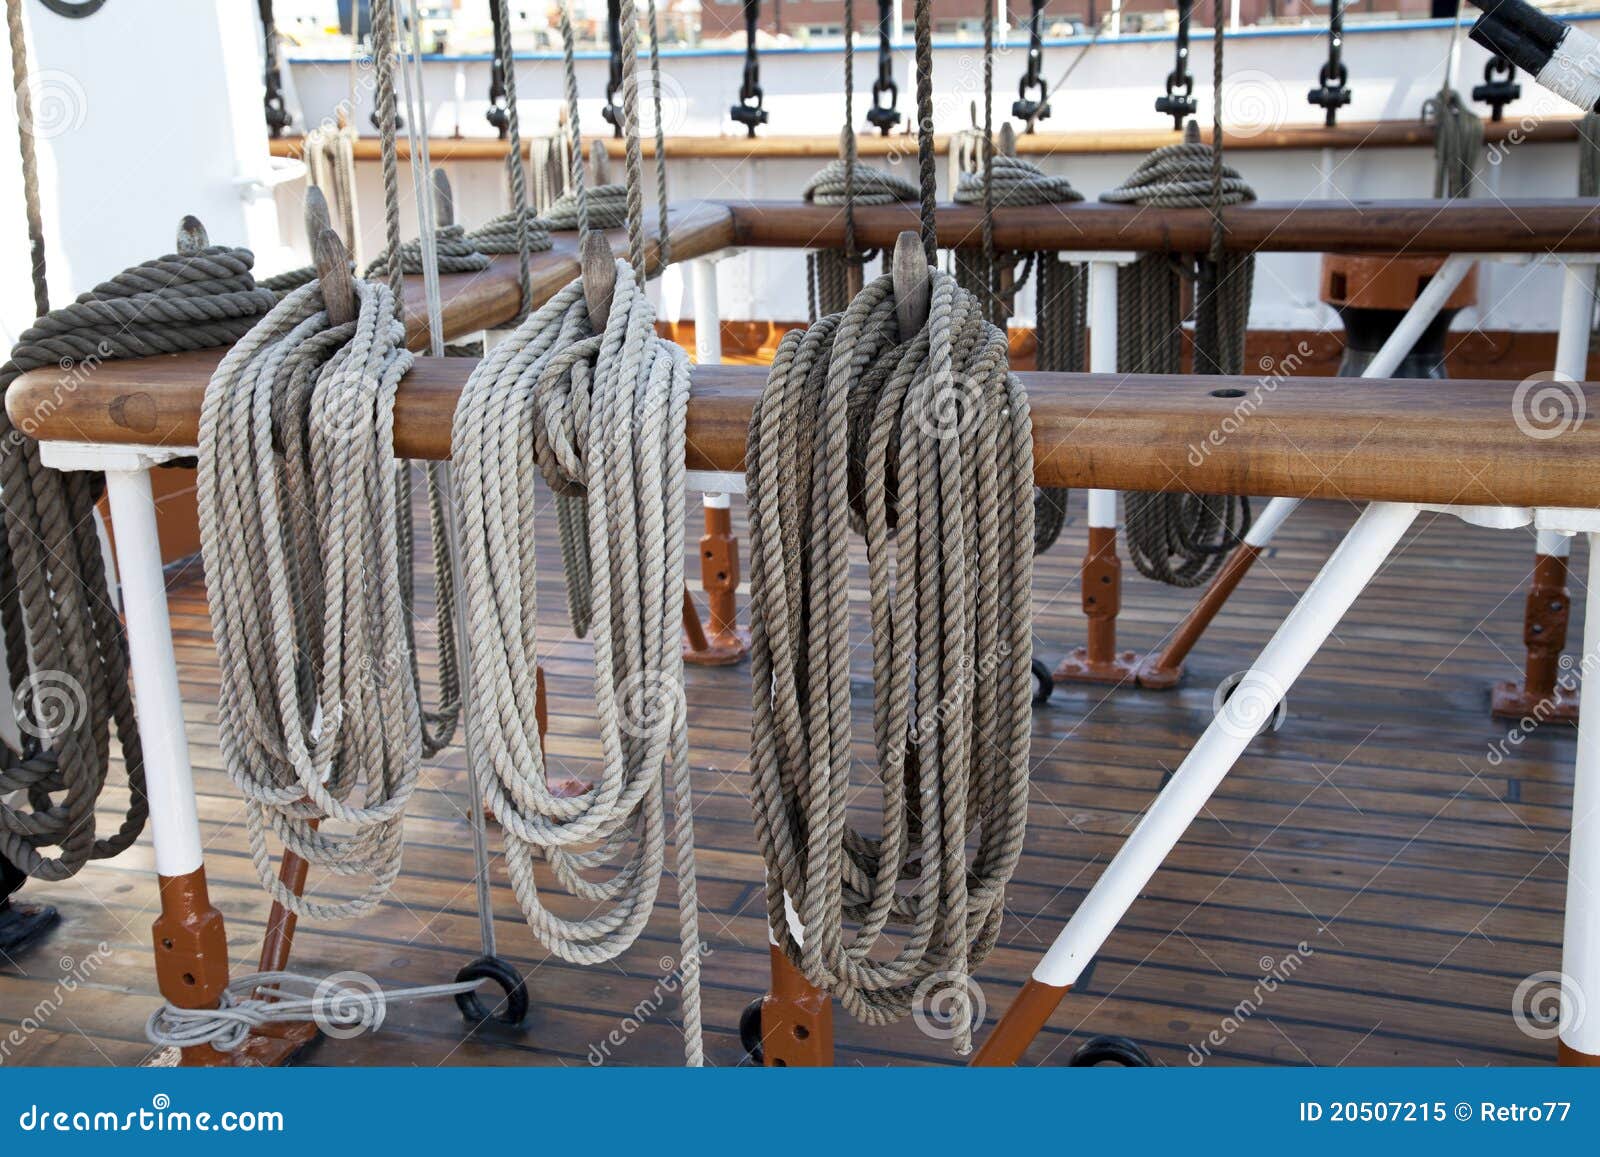 sailboat wooden marine rigs and ropes. stock image - image